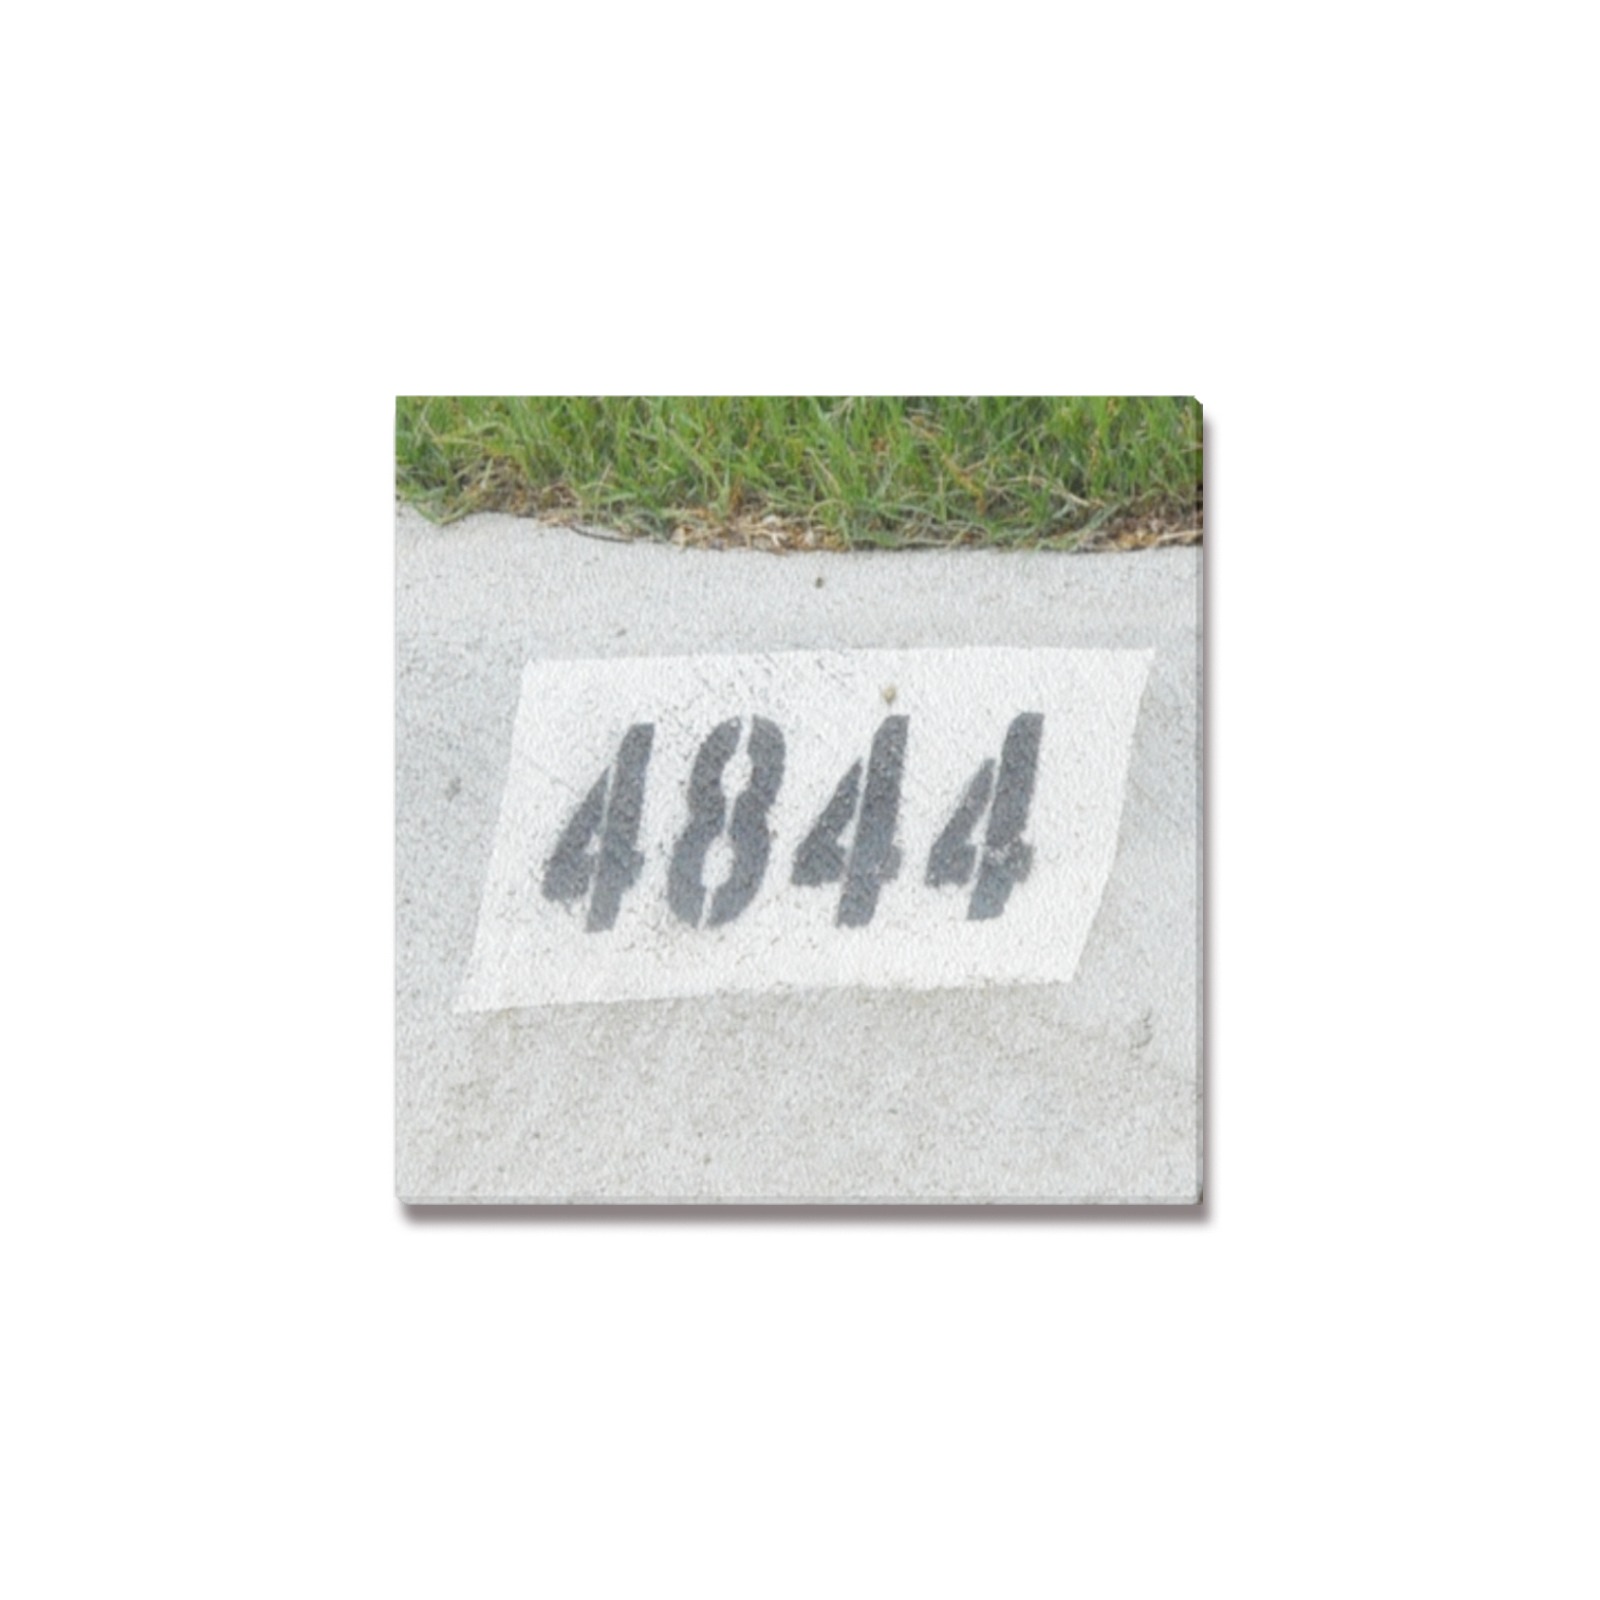 Street Number 4844 Upgraded Canvas Print 6"x6"